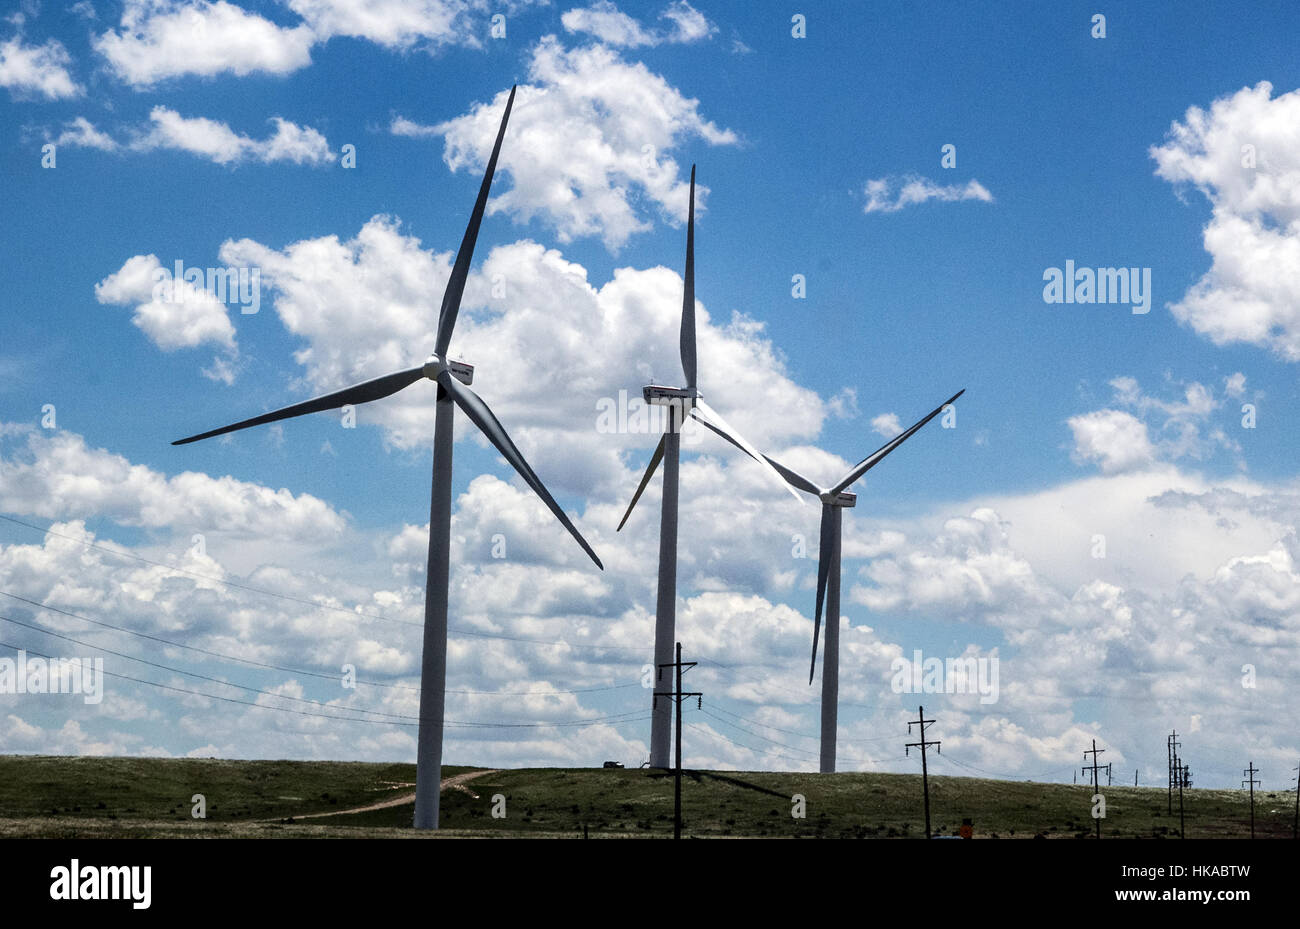 Huge wind turbines line the highways of New Mexico generating wind power. Stock Photo